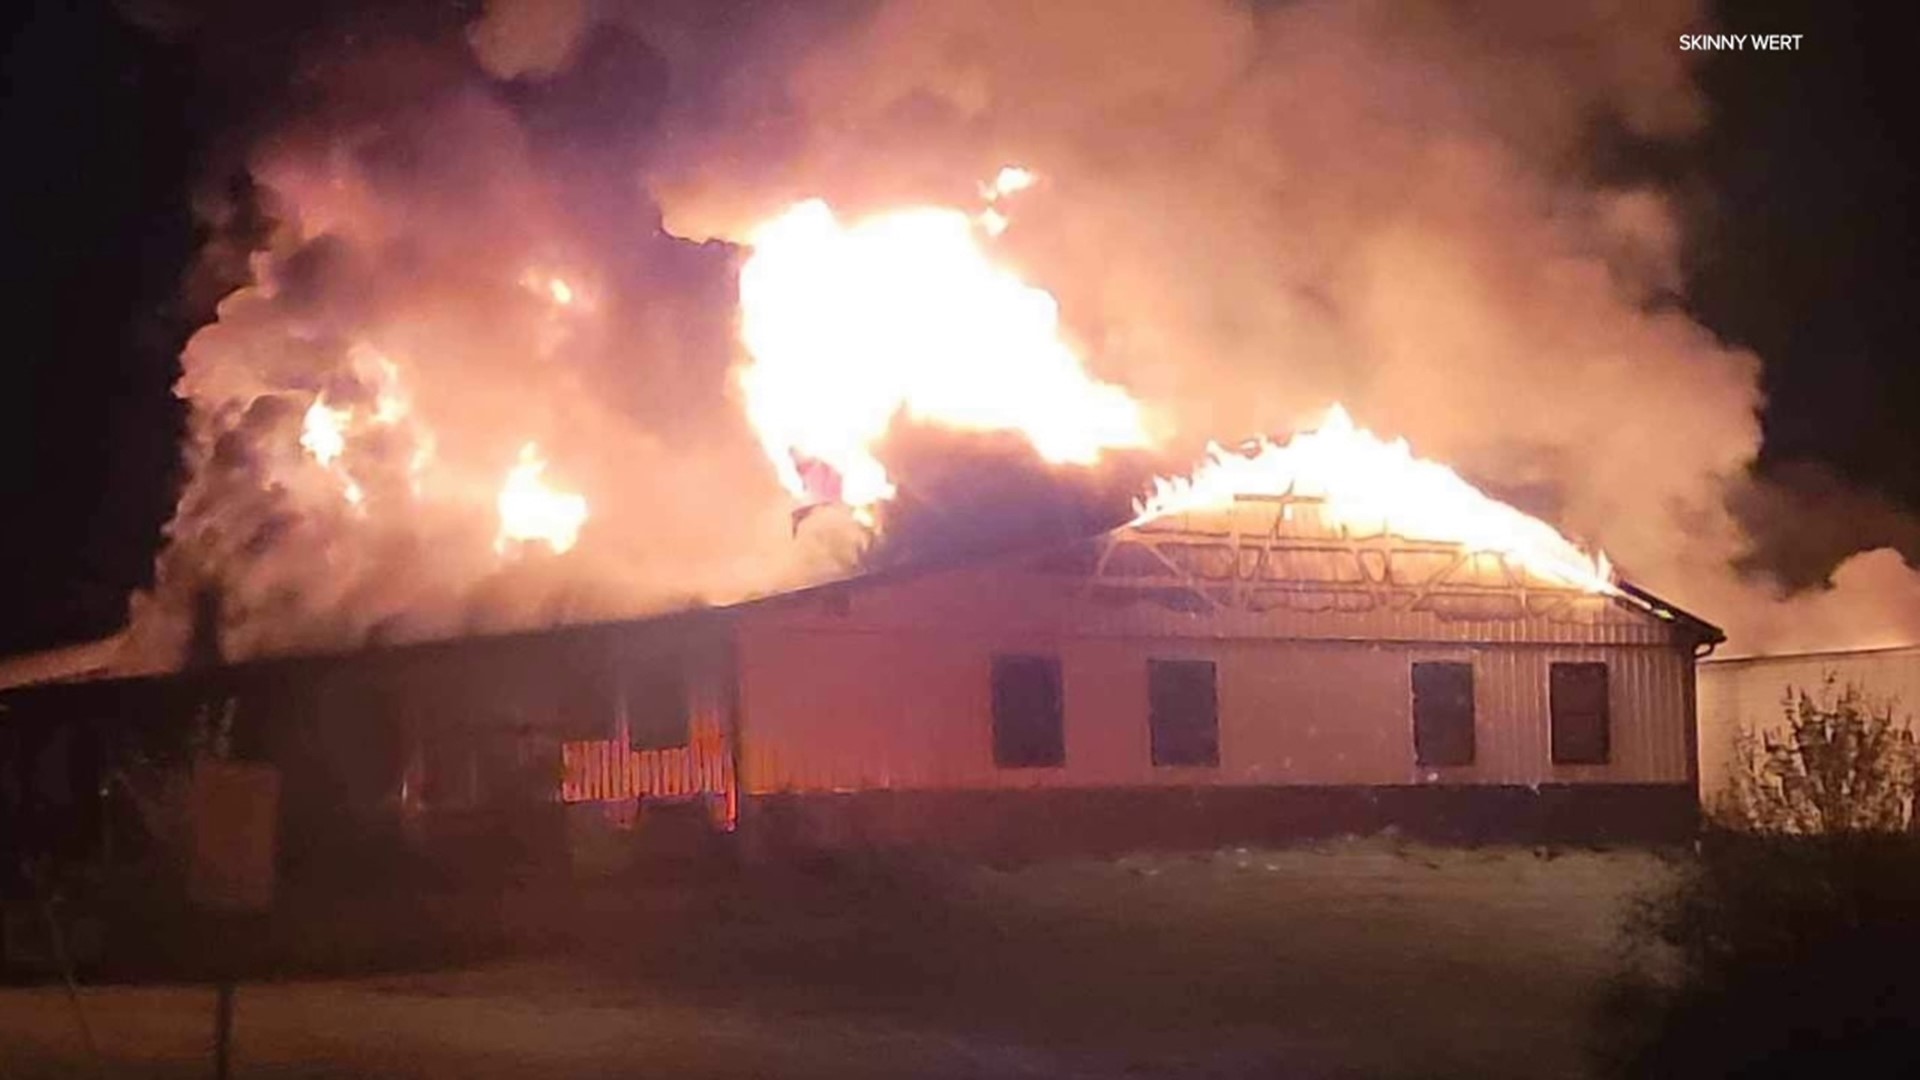 Flames broke out around 12:30 a.m. Wednesday in Lamar Township, near Mill Hall.